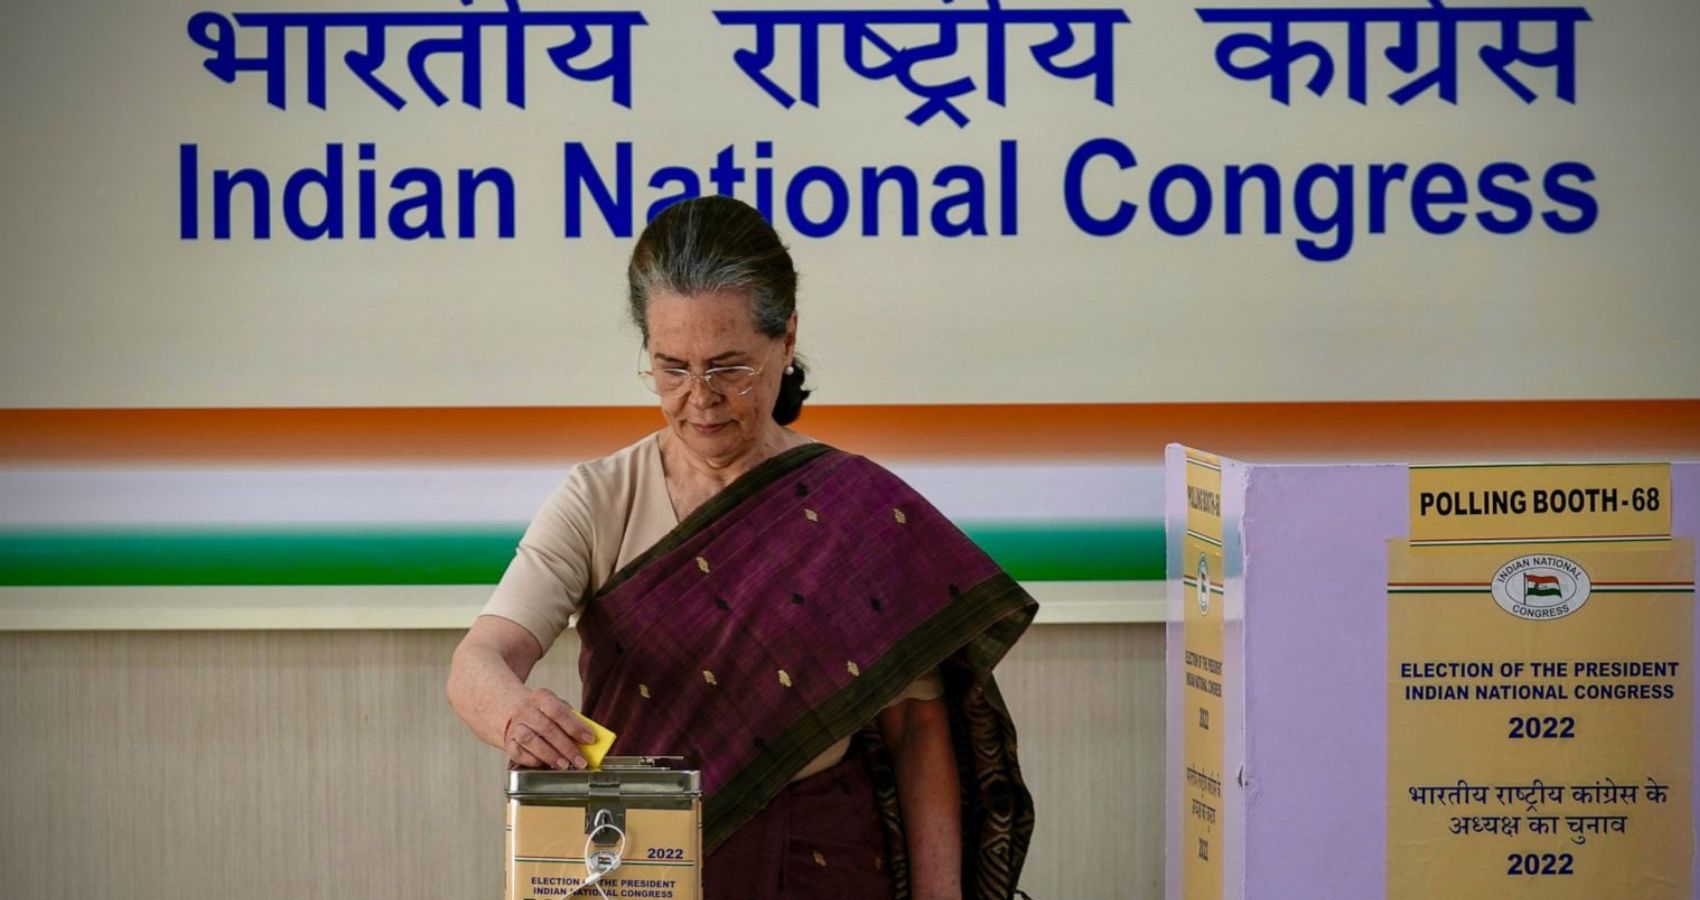 India’s Congress Party Votes To Elect New President In Over A Quarter Century